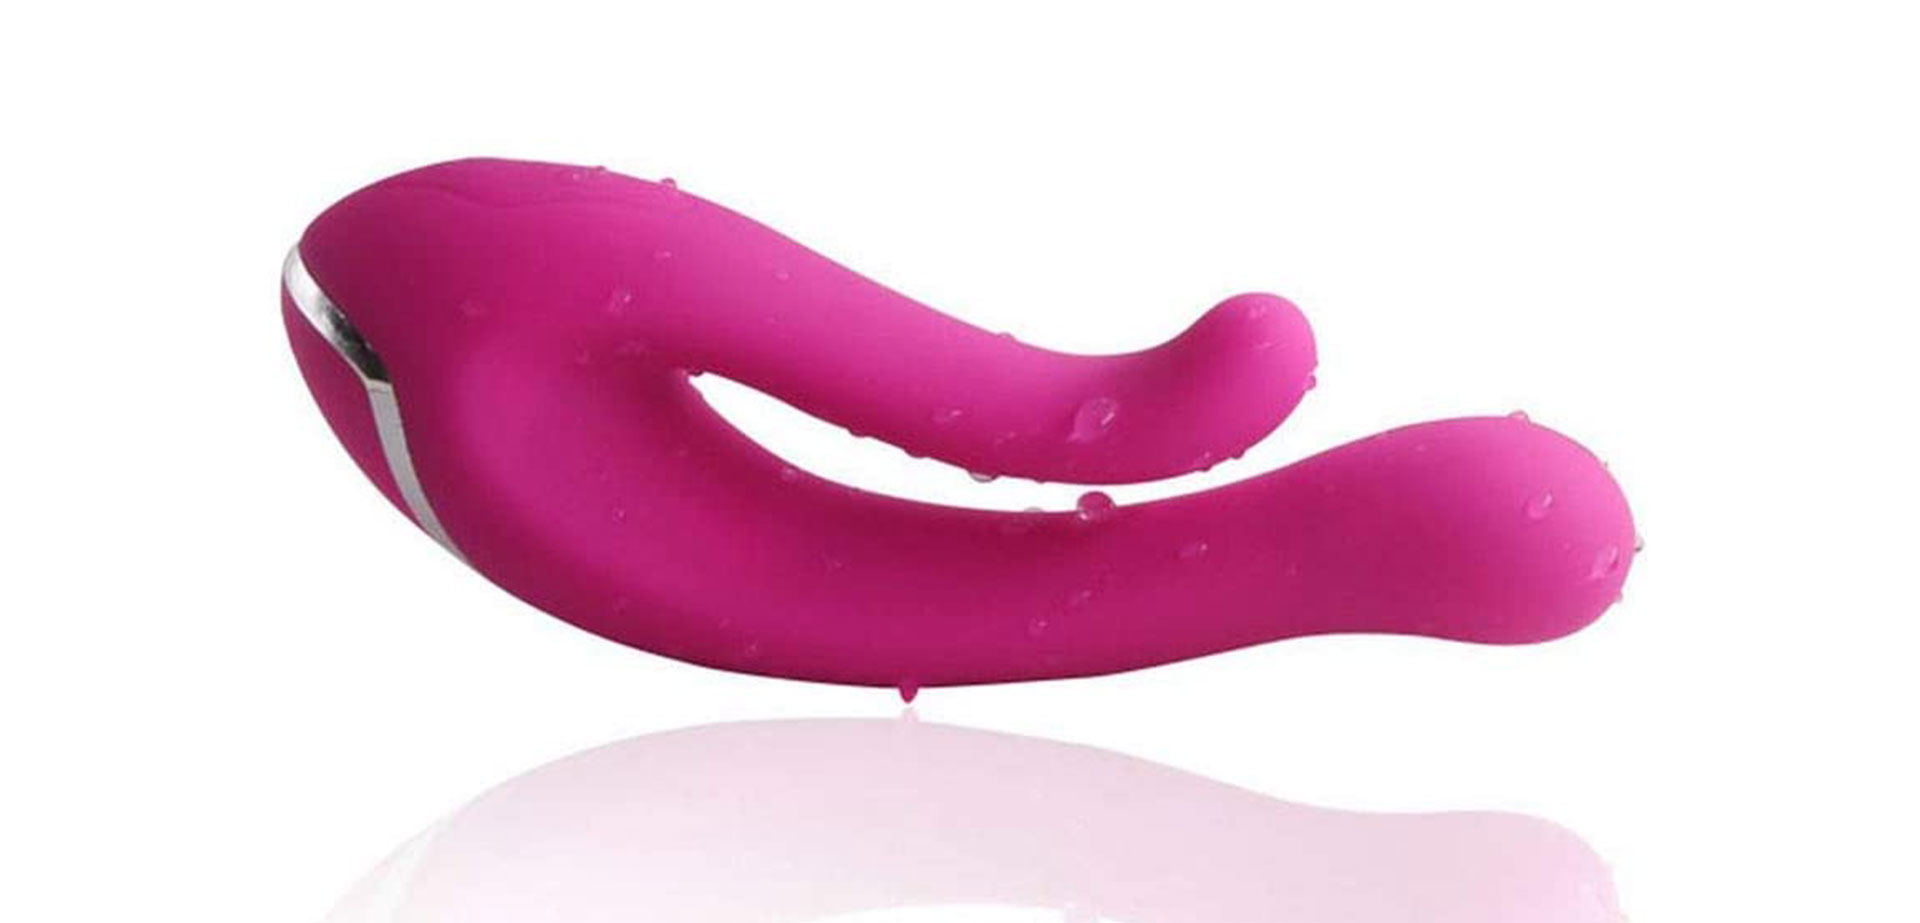 Best pink double penetration toy.